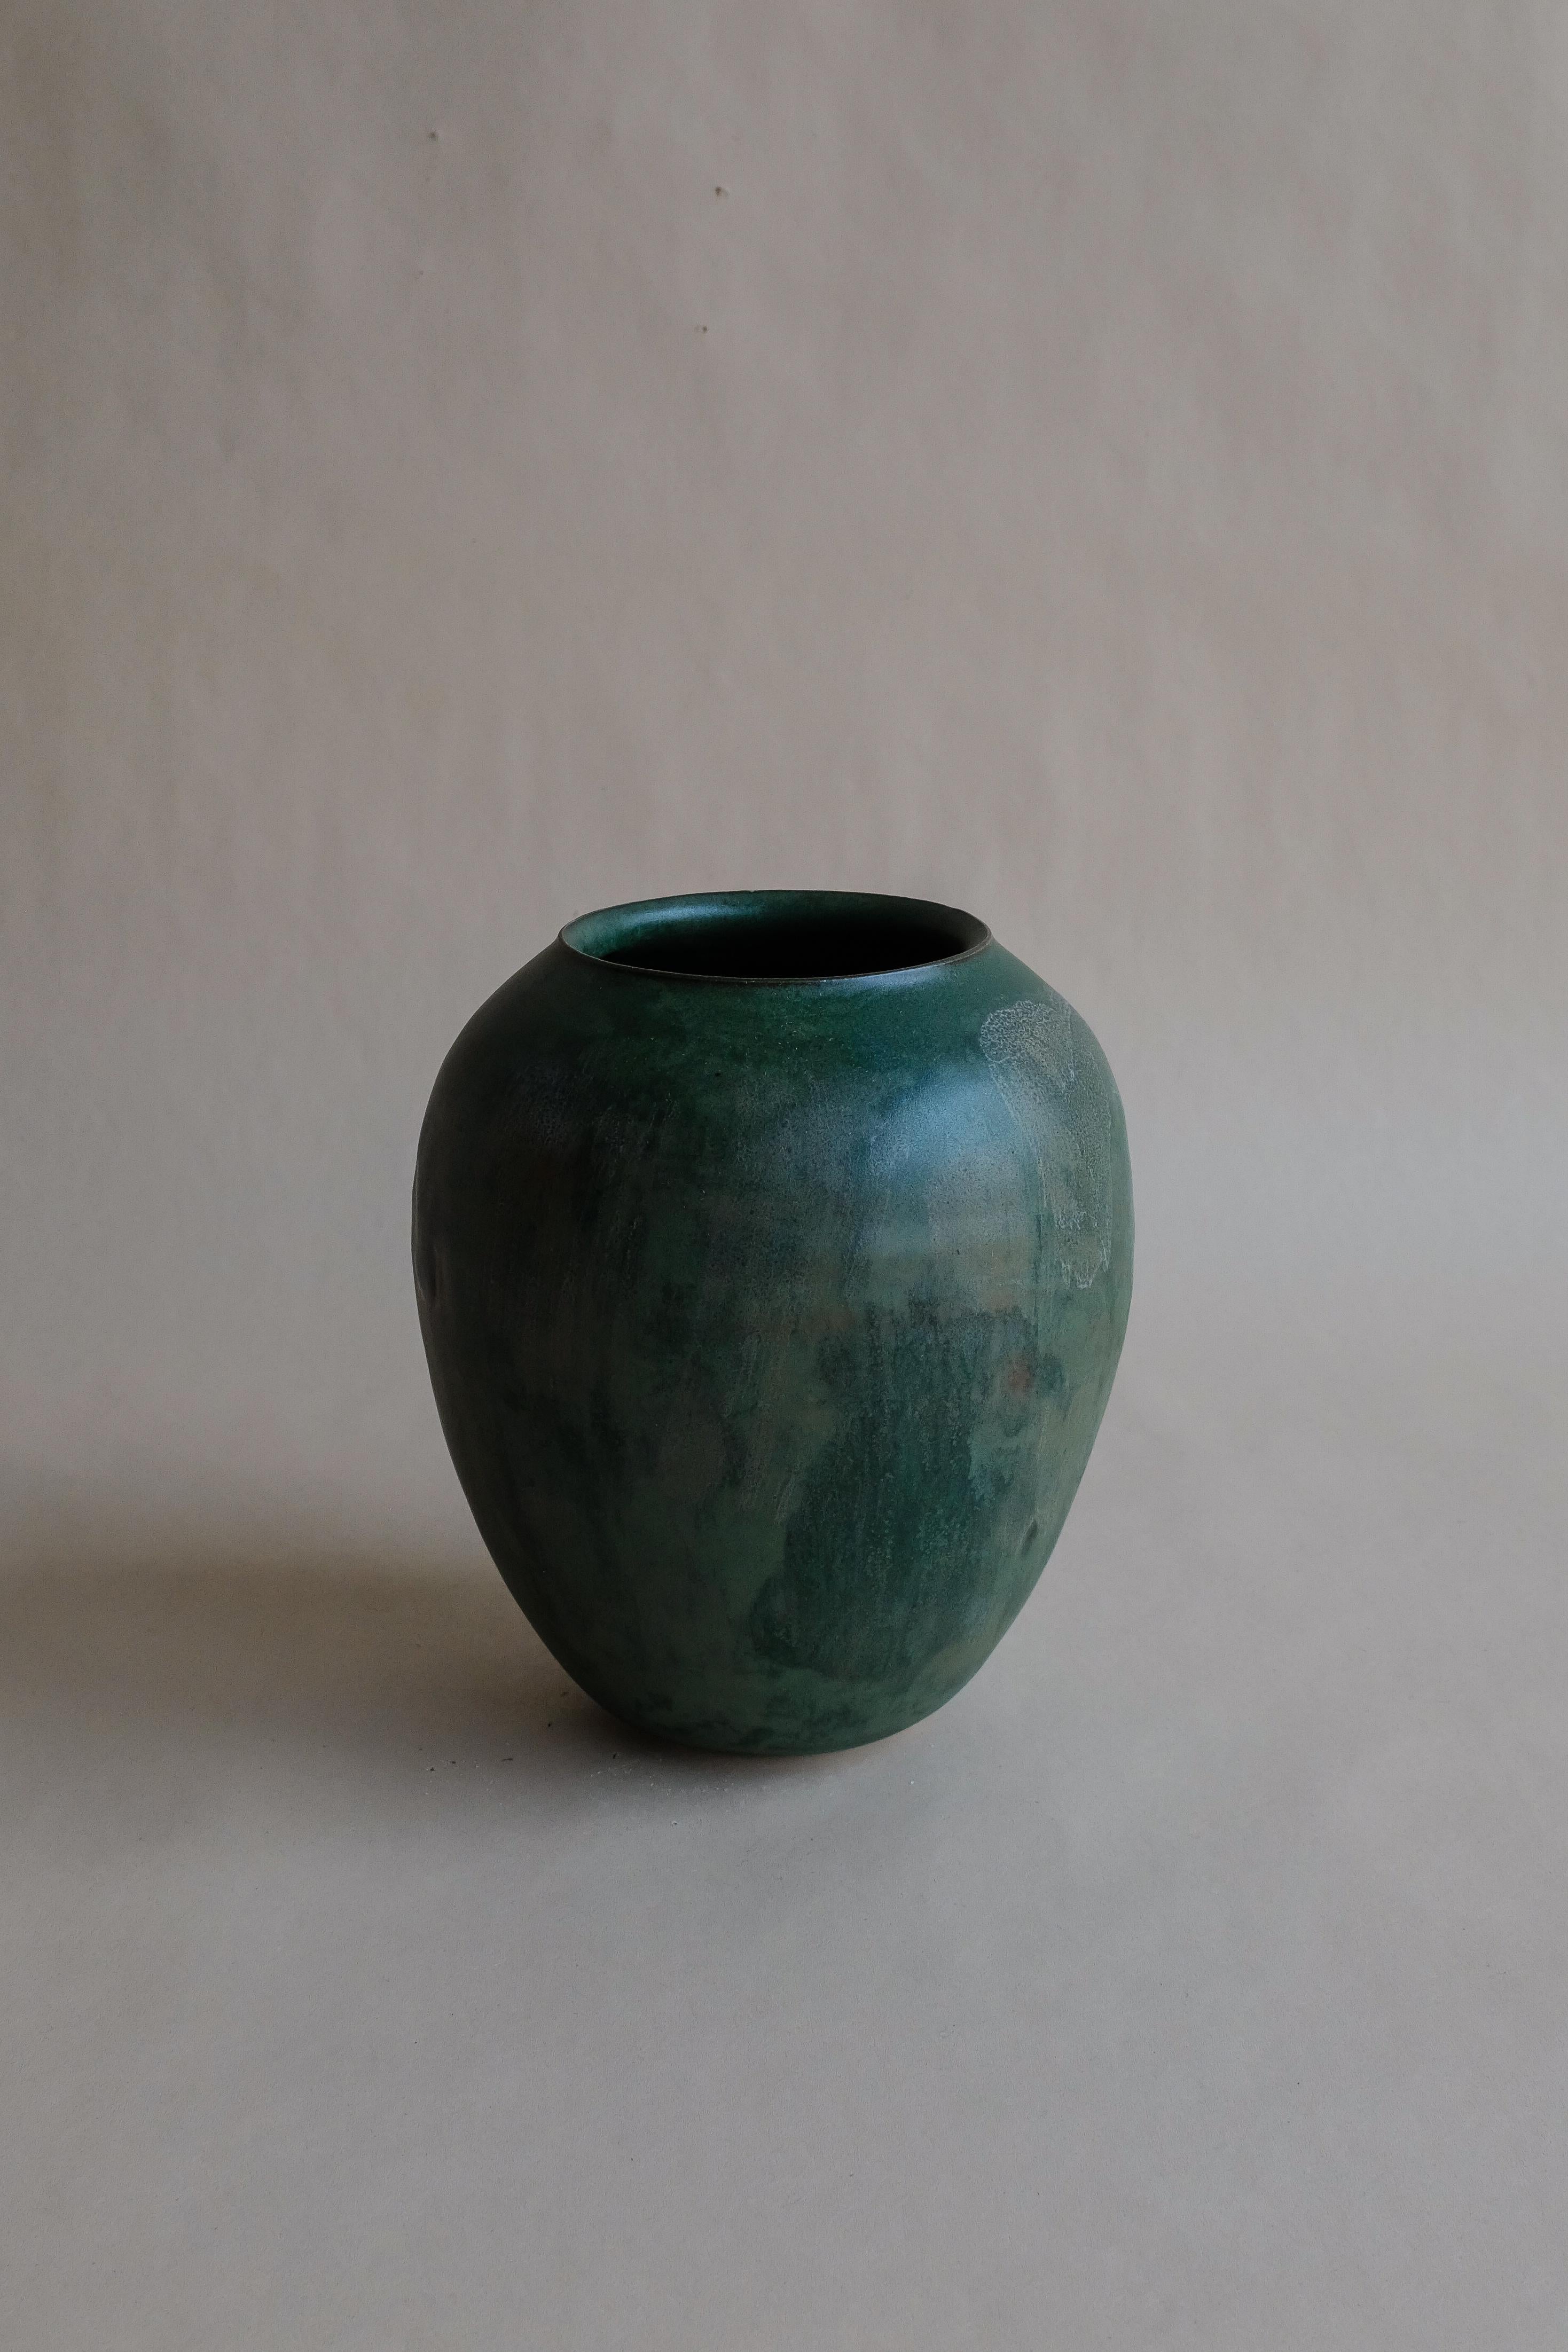 - Hand-thrown porcelain, featuring a proprietary, dimensional glaze fired in a high-fired gas kiln
- Organic rounded silhouette
- Form is inspired by the custard apple (mãng cầu)
- Hand-thrown porcelain, featuring a proprietary, dimensional glaze